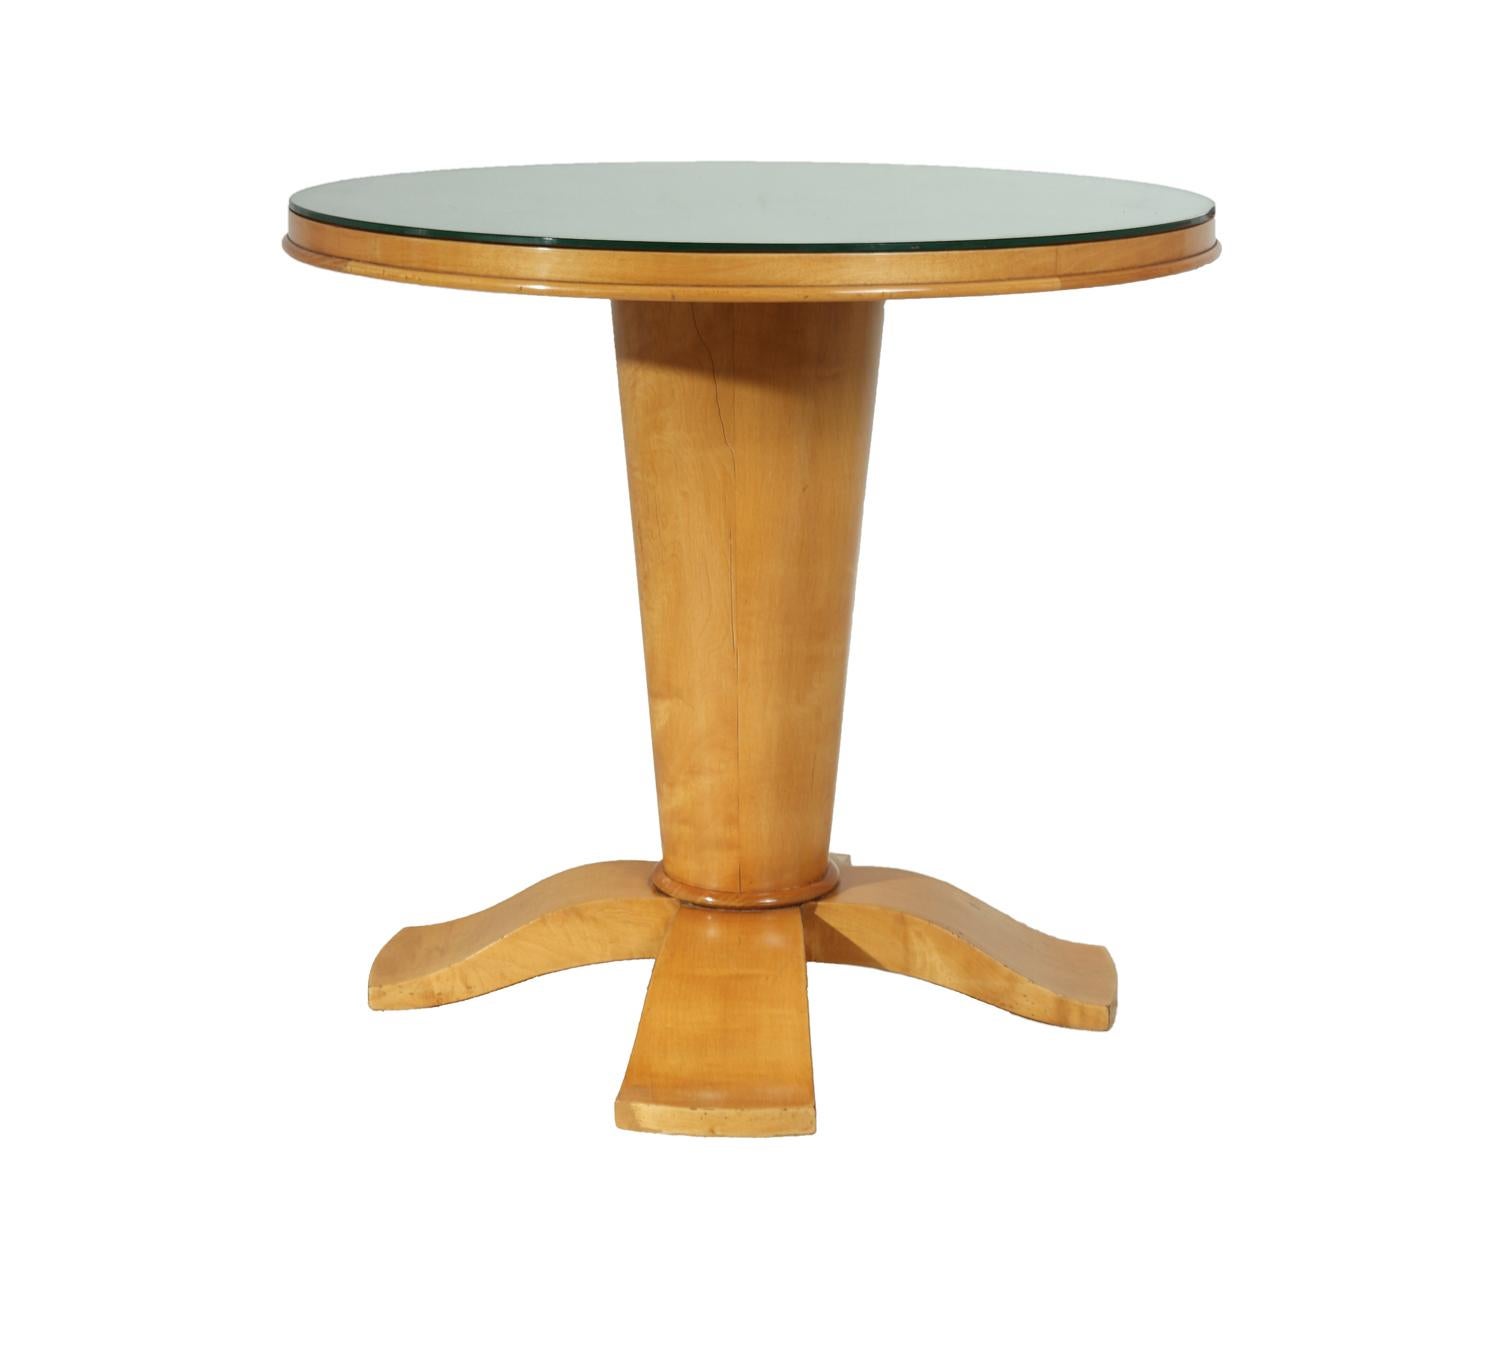 Art Deco table with mirrored top, circa 1940
A satin birch single pedestal side table with mirrored top, possibly Jules Leleu, original mirror with marks and light scratches can be replaced if necessary base in very good condition fully hand